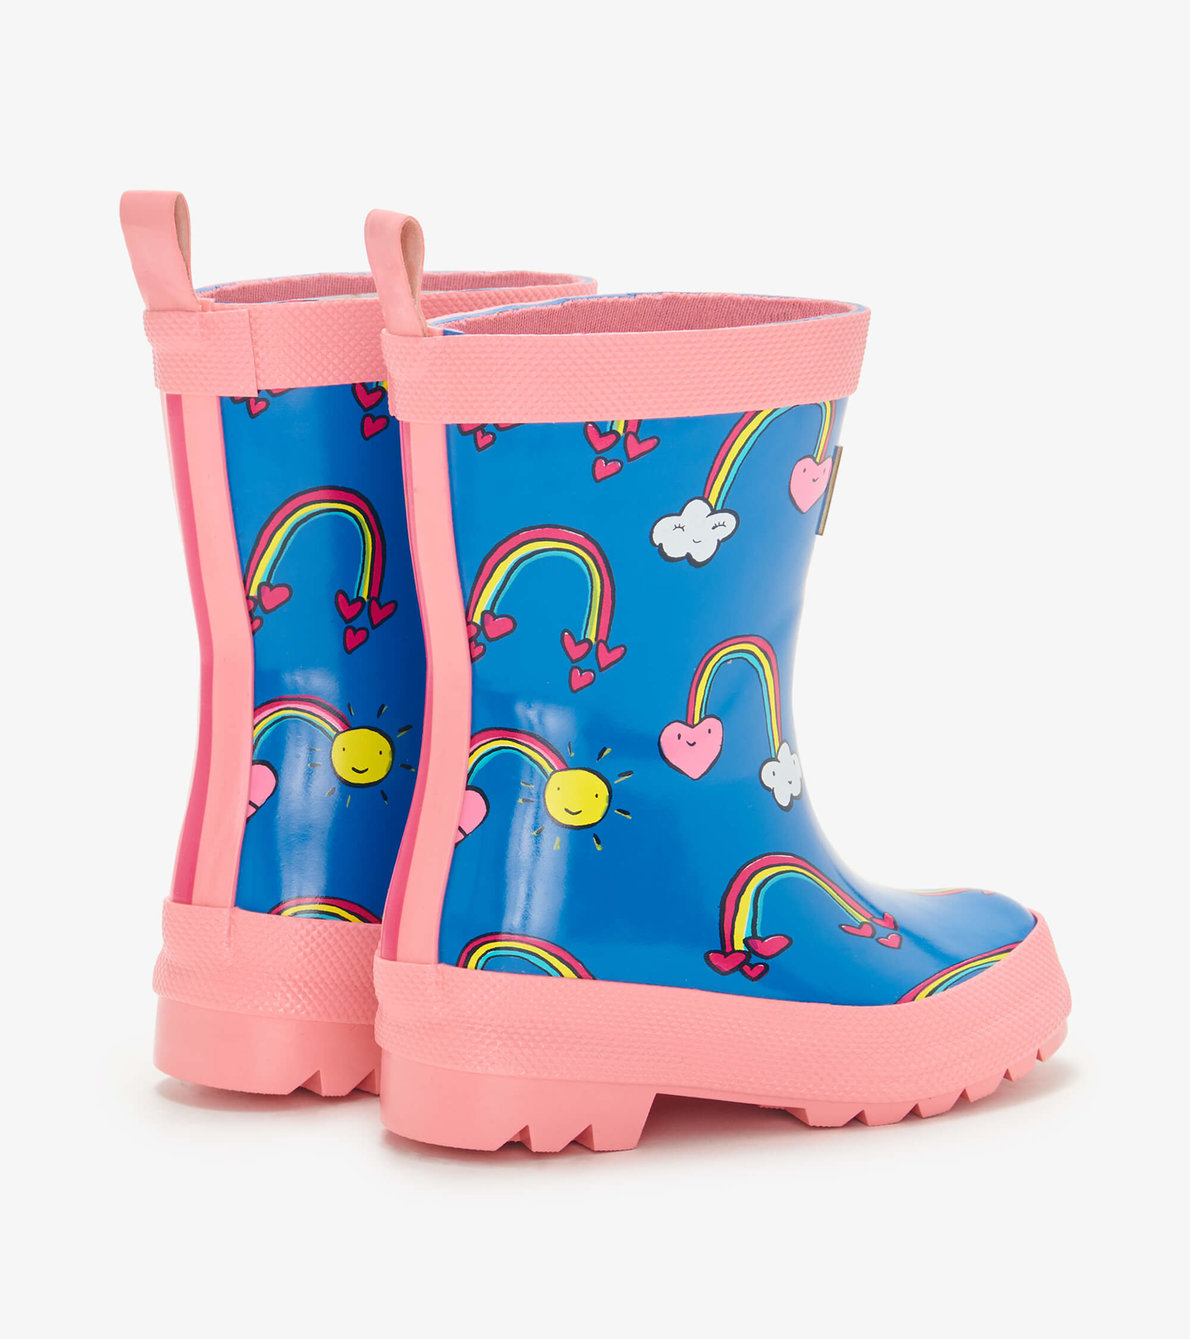 View larger image of My 1st Rain Boots - Summer Sky